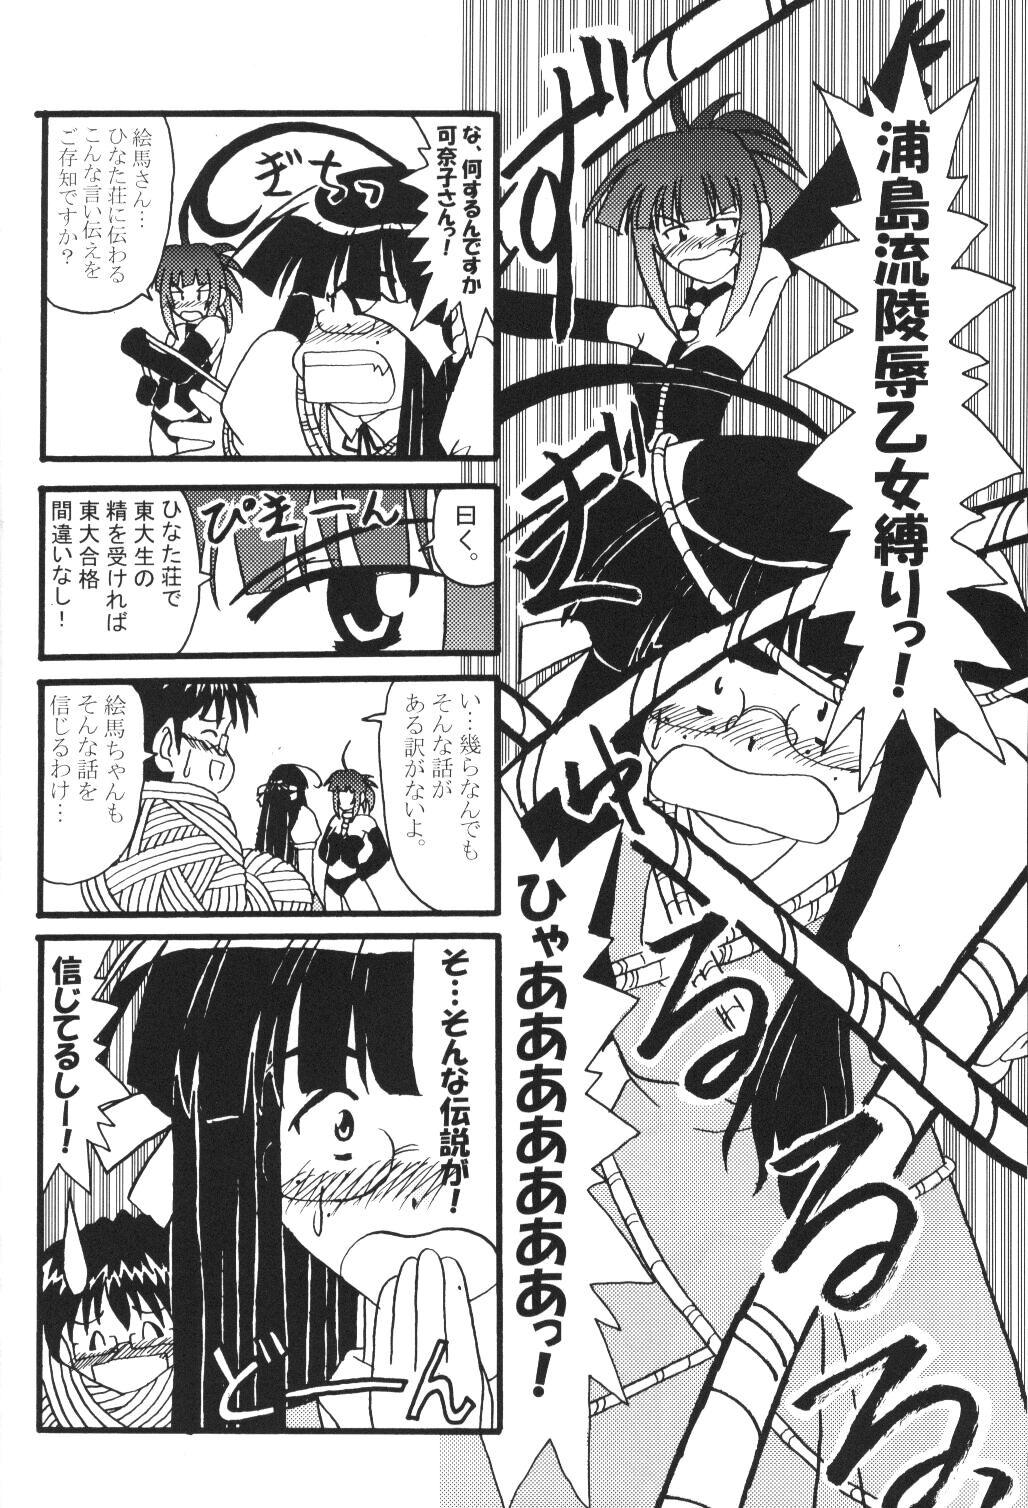 Chubby Sex Appeal 5 - Love hina Skinny - Page 7